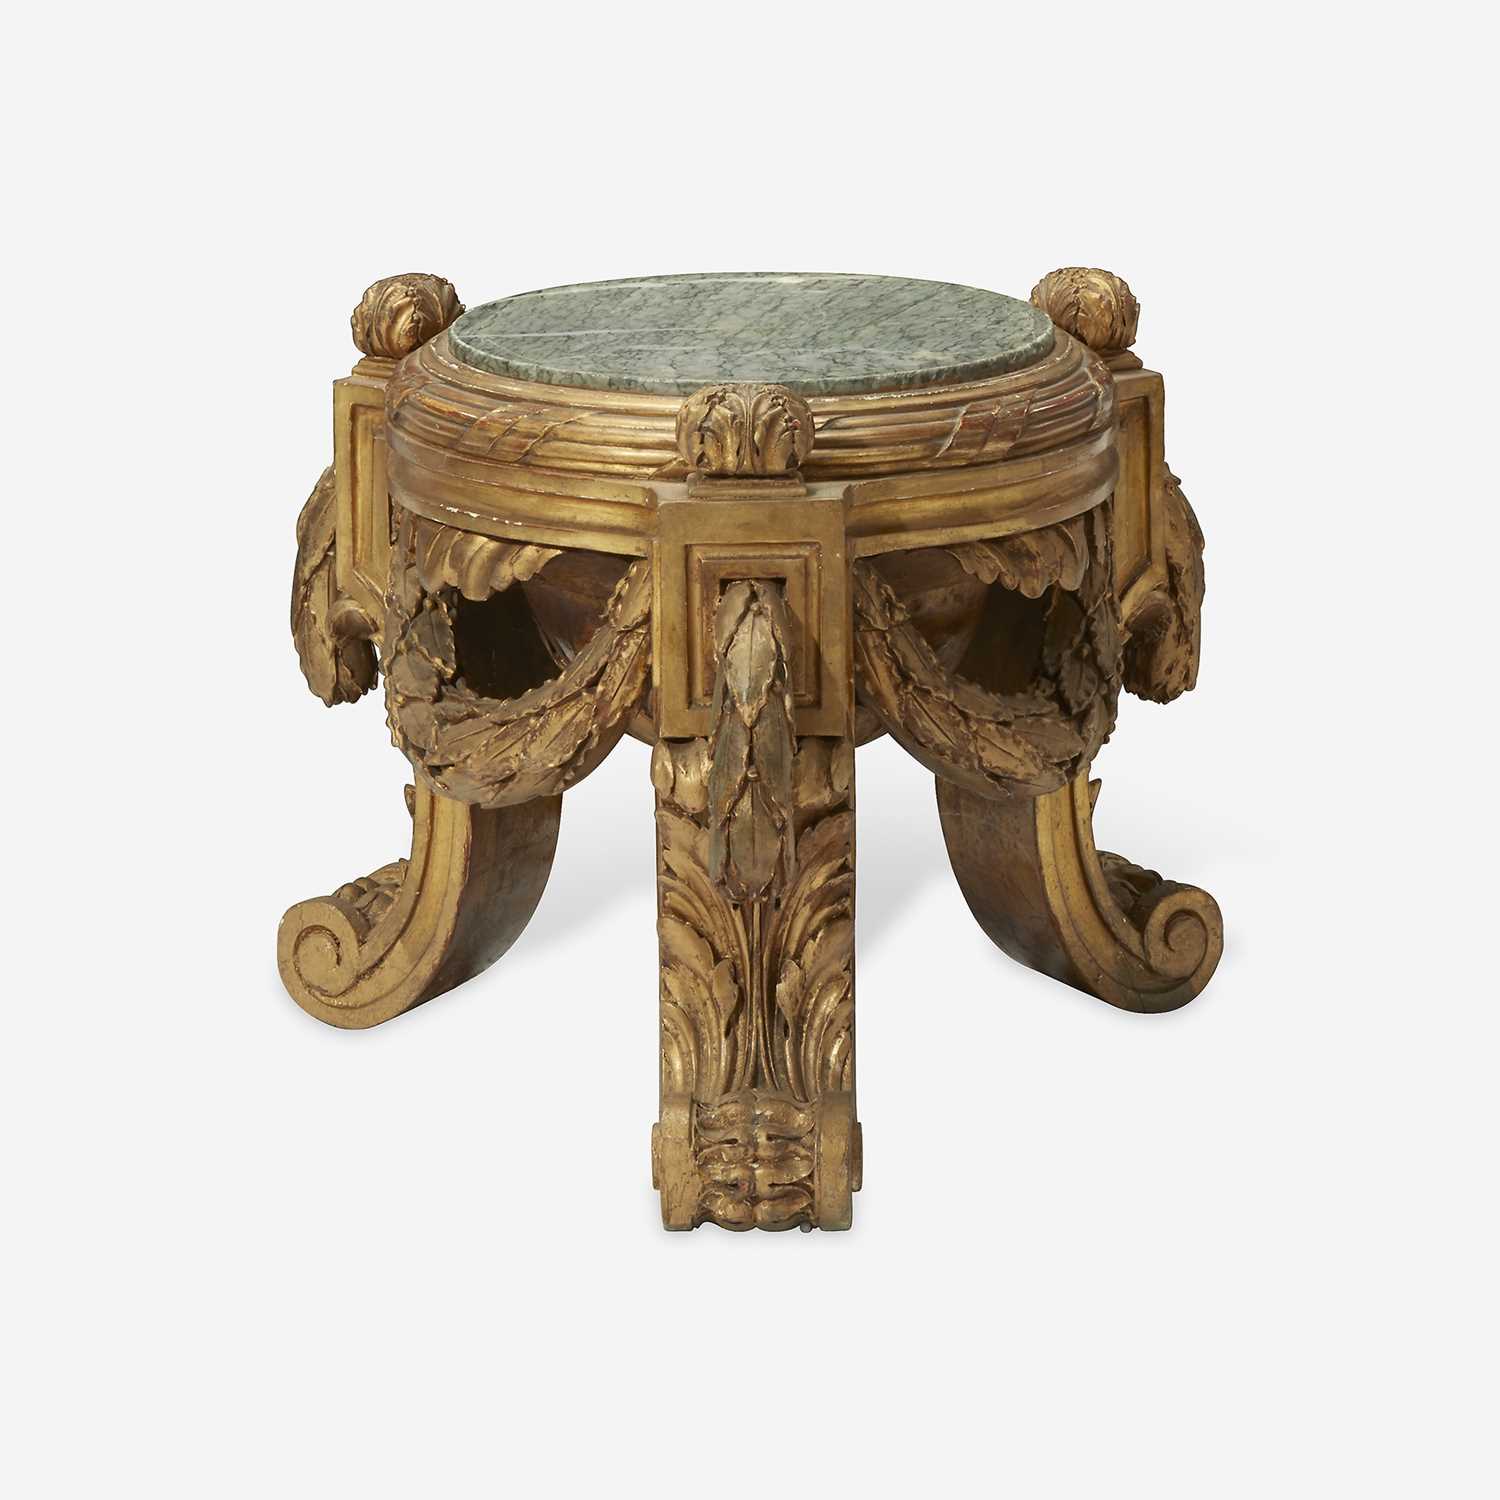 Lot 32 - A Louis XVI Style Giltwood and Marble Tabouret